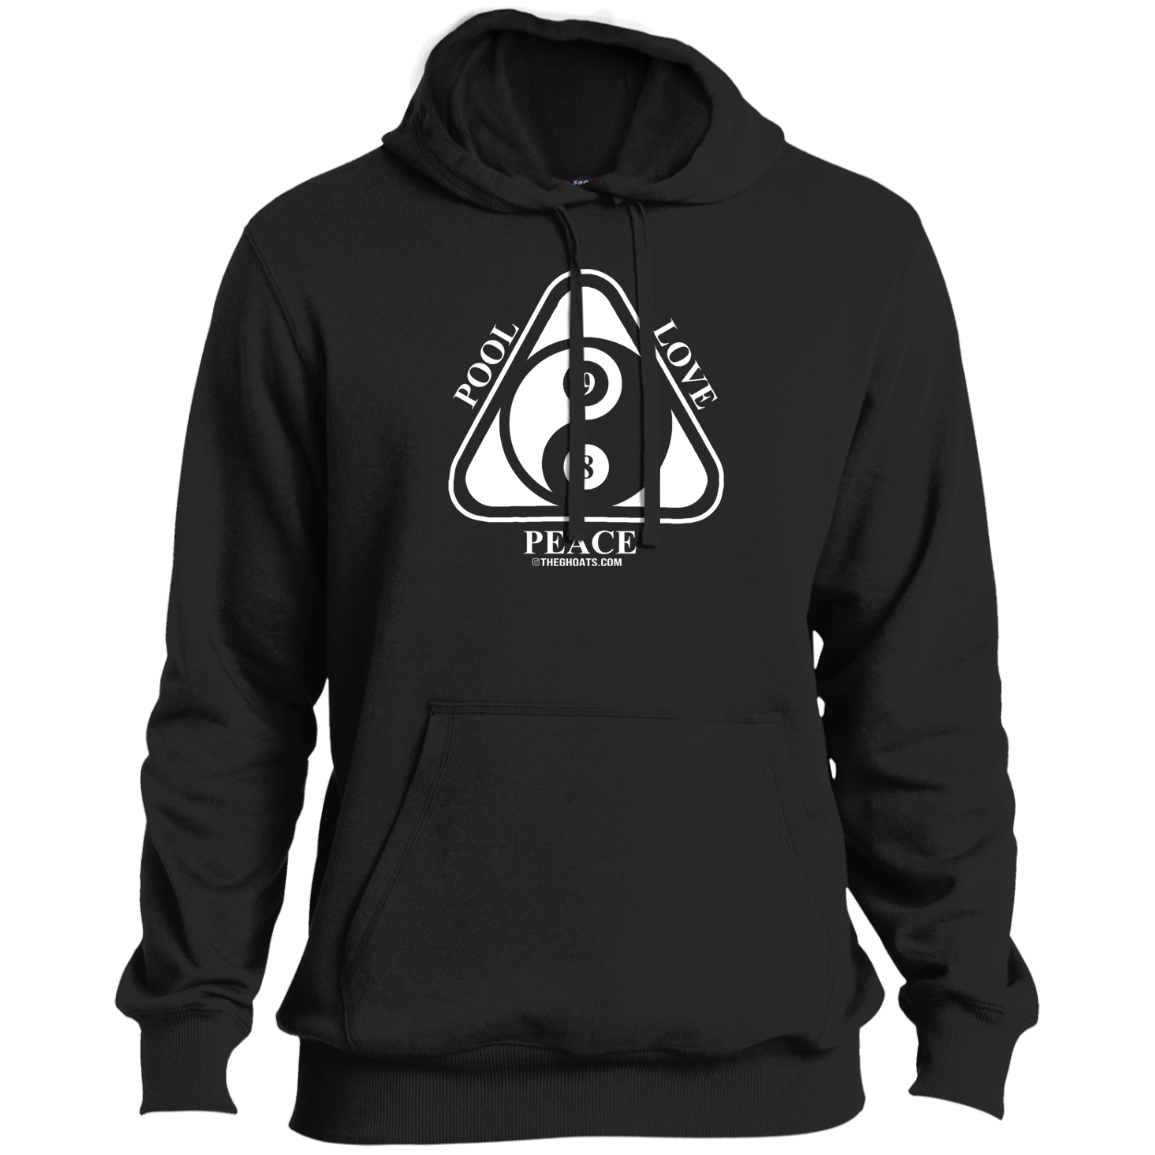 The GHOATS Custom Design #9. Ying Yang. Pool Love Peace. Tall Pullover Hoodie